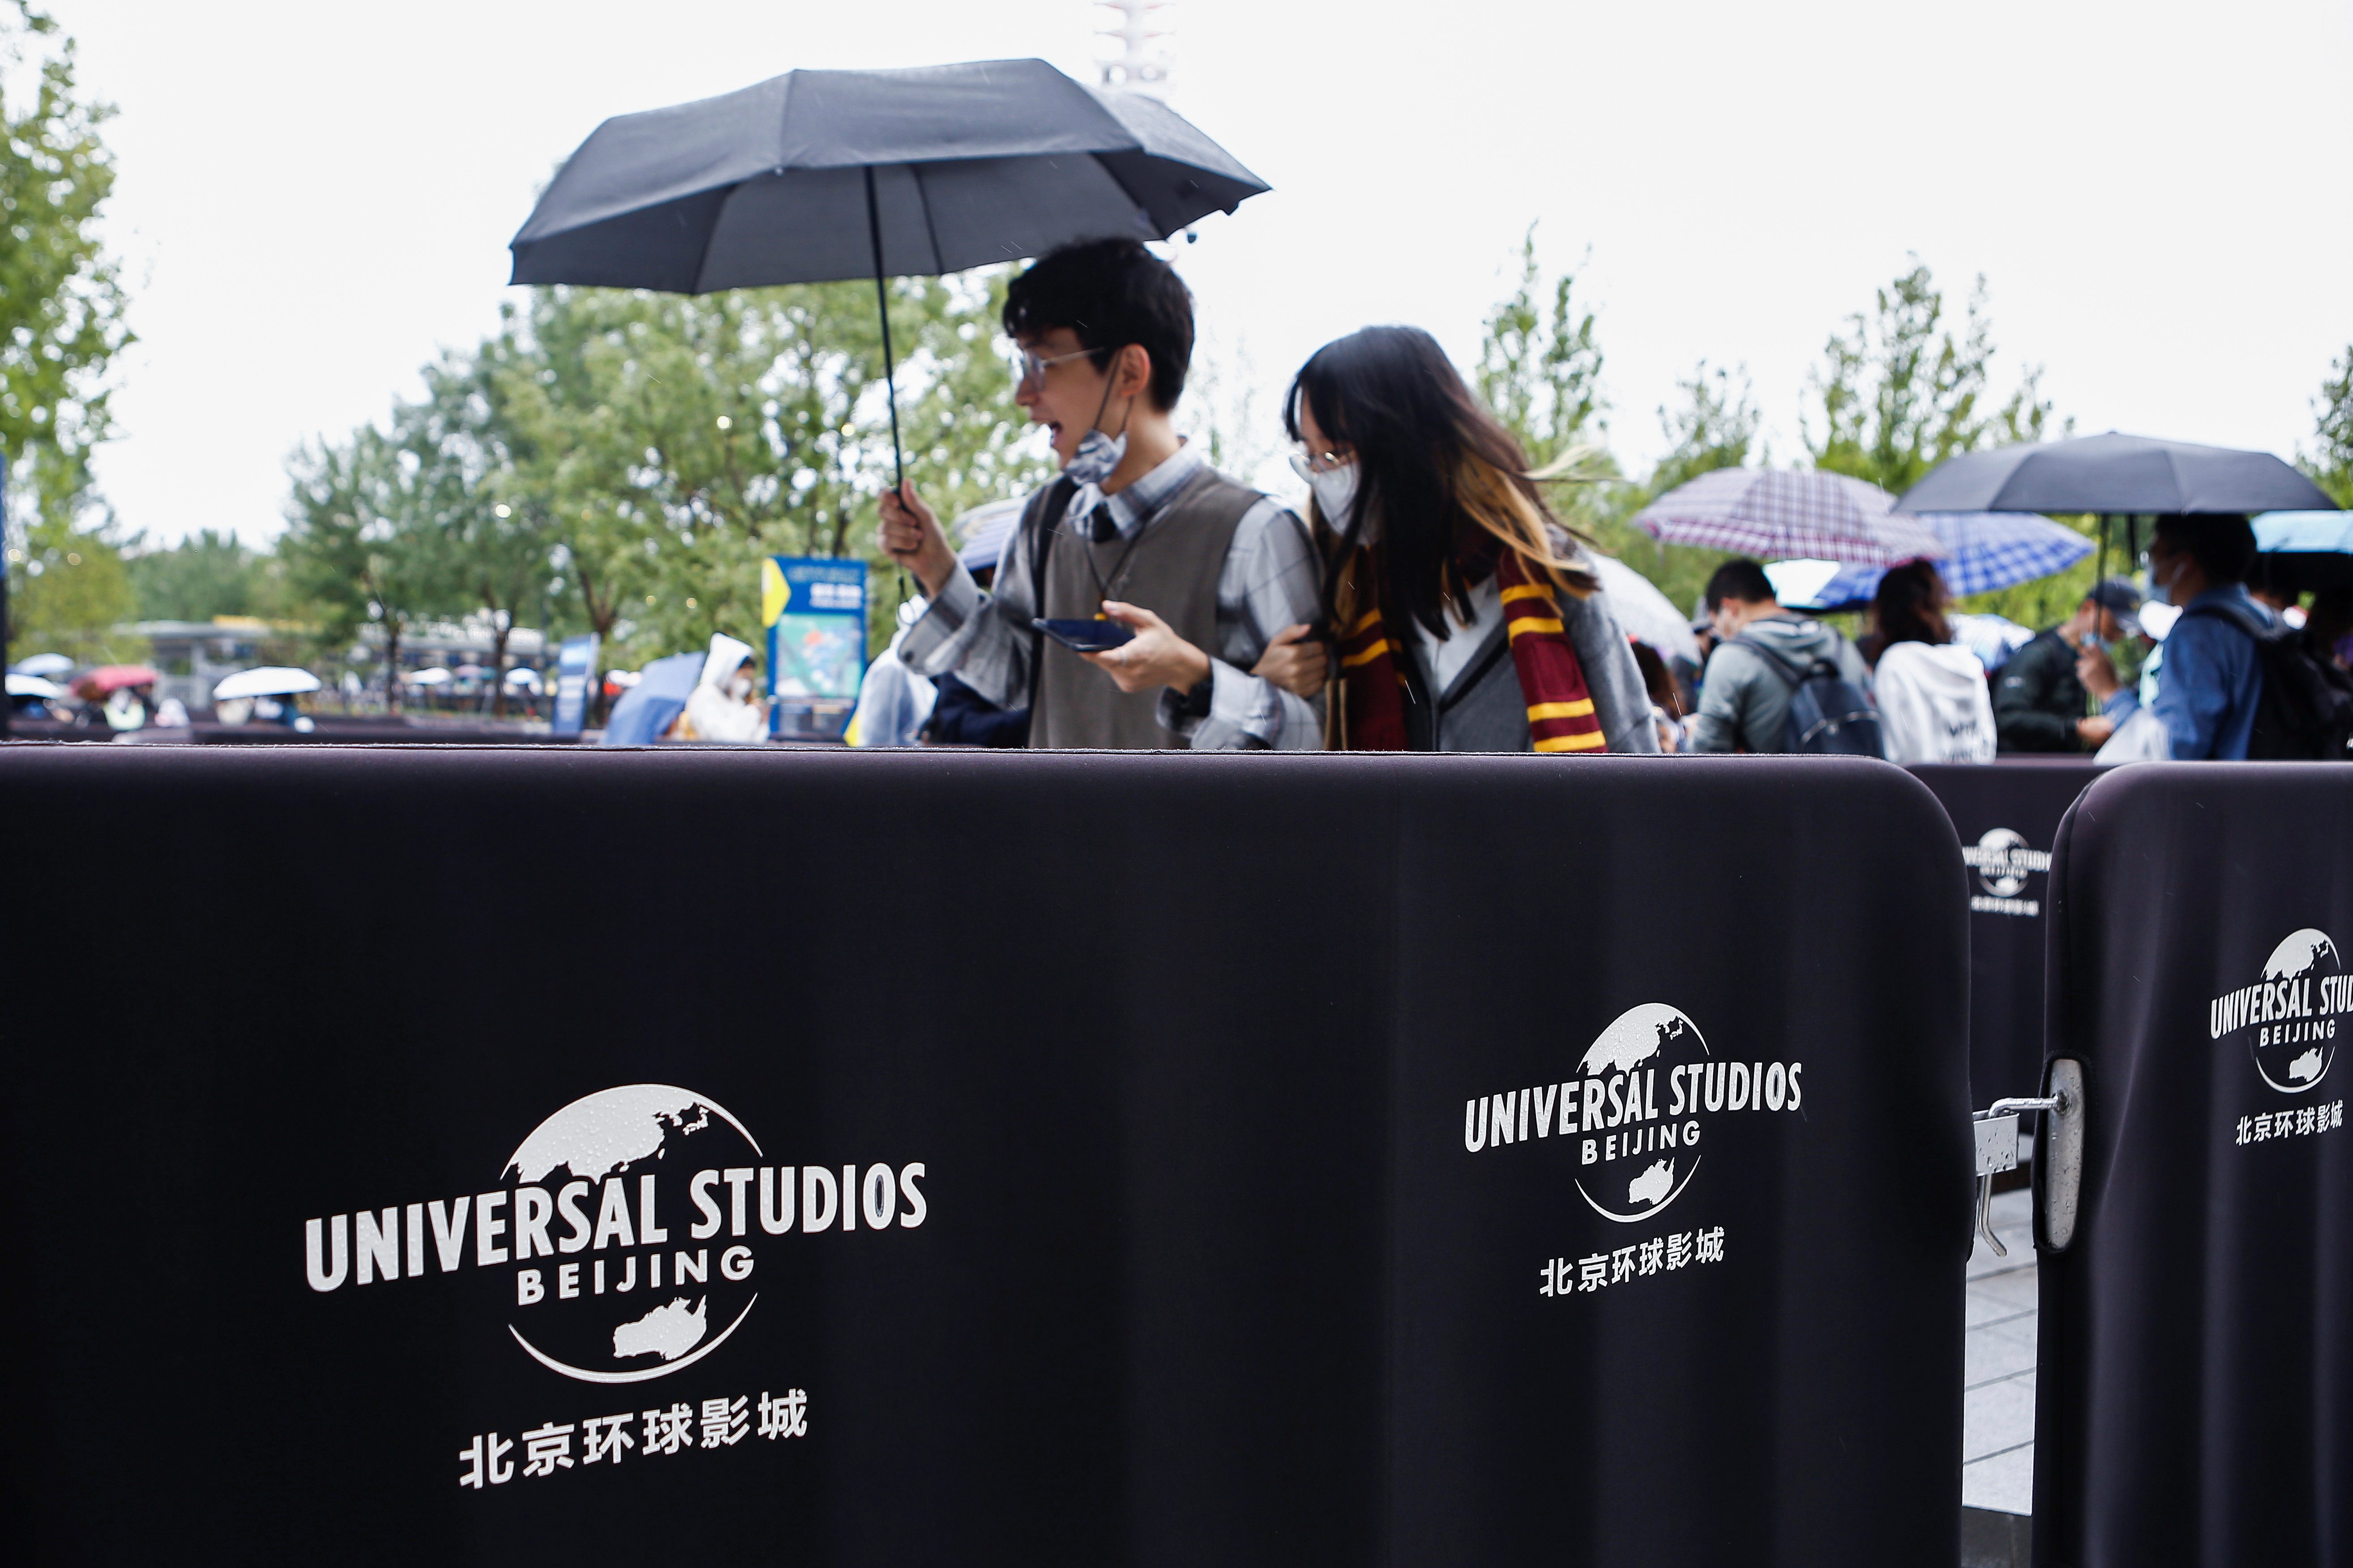 Universal Studios Beijing draws eager crowds amid uneasy US-China ties